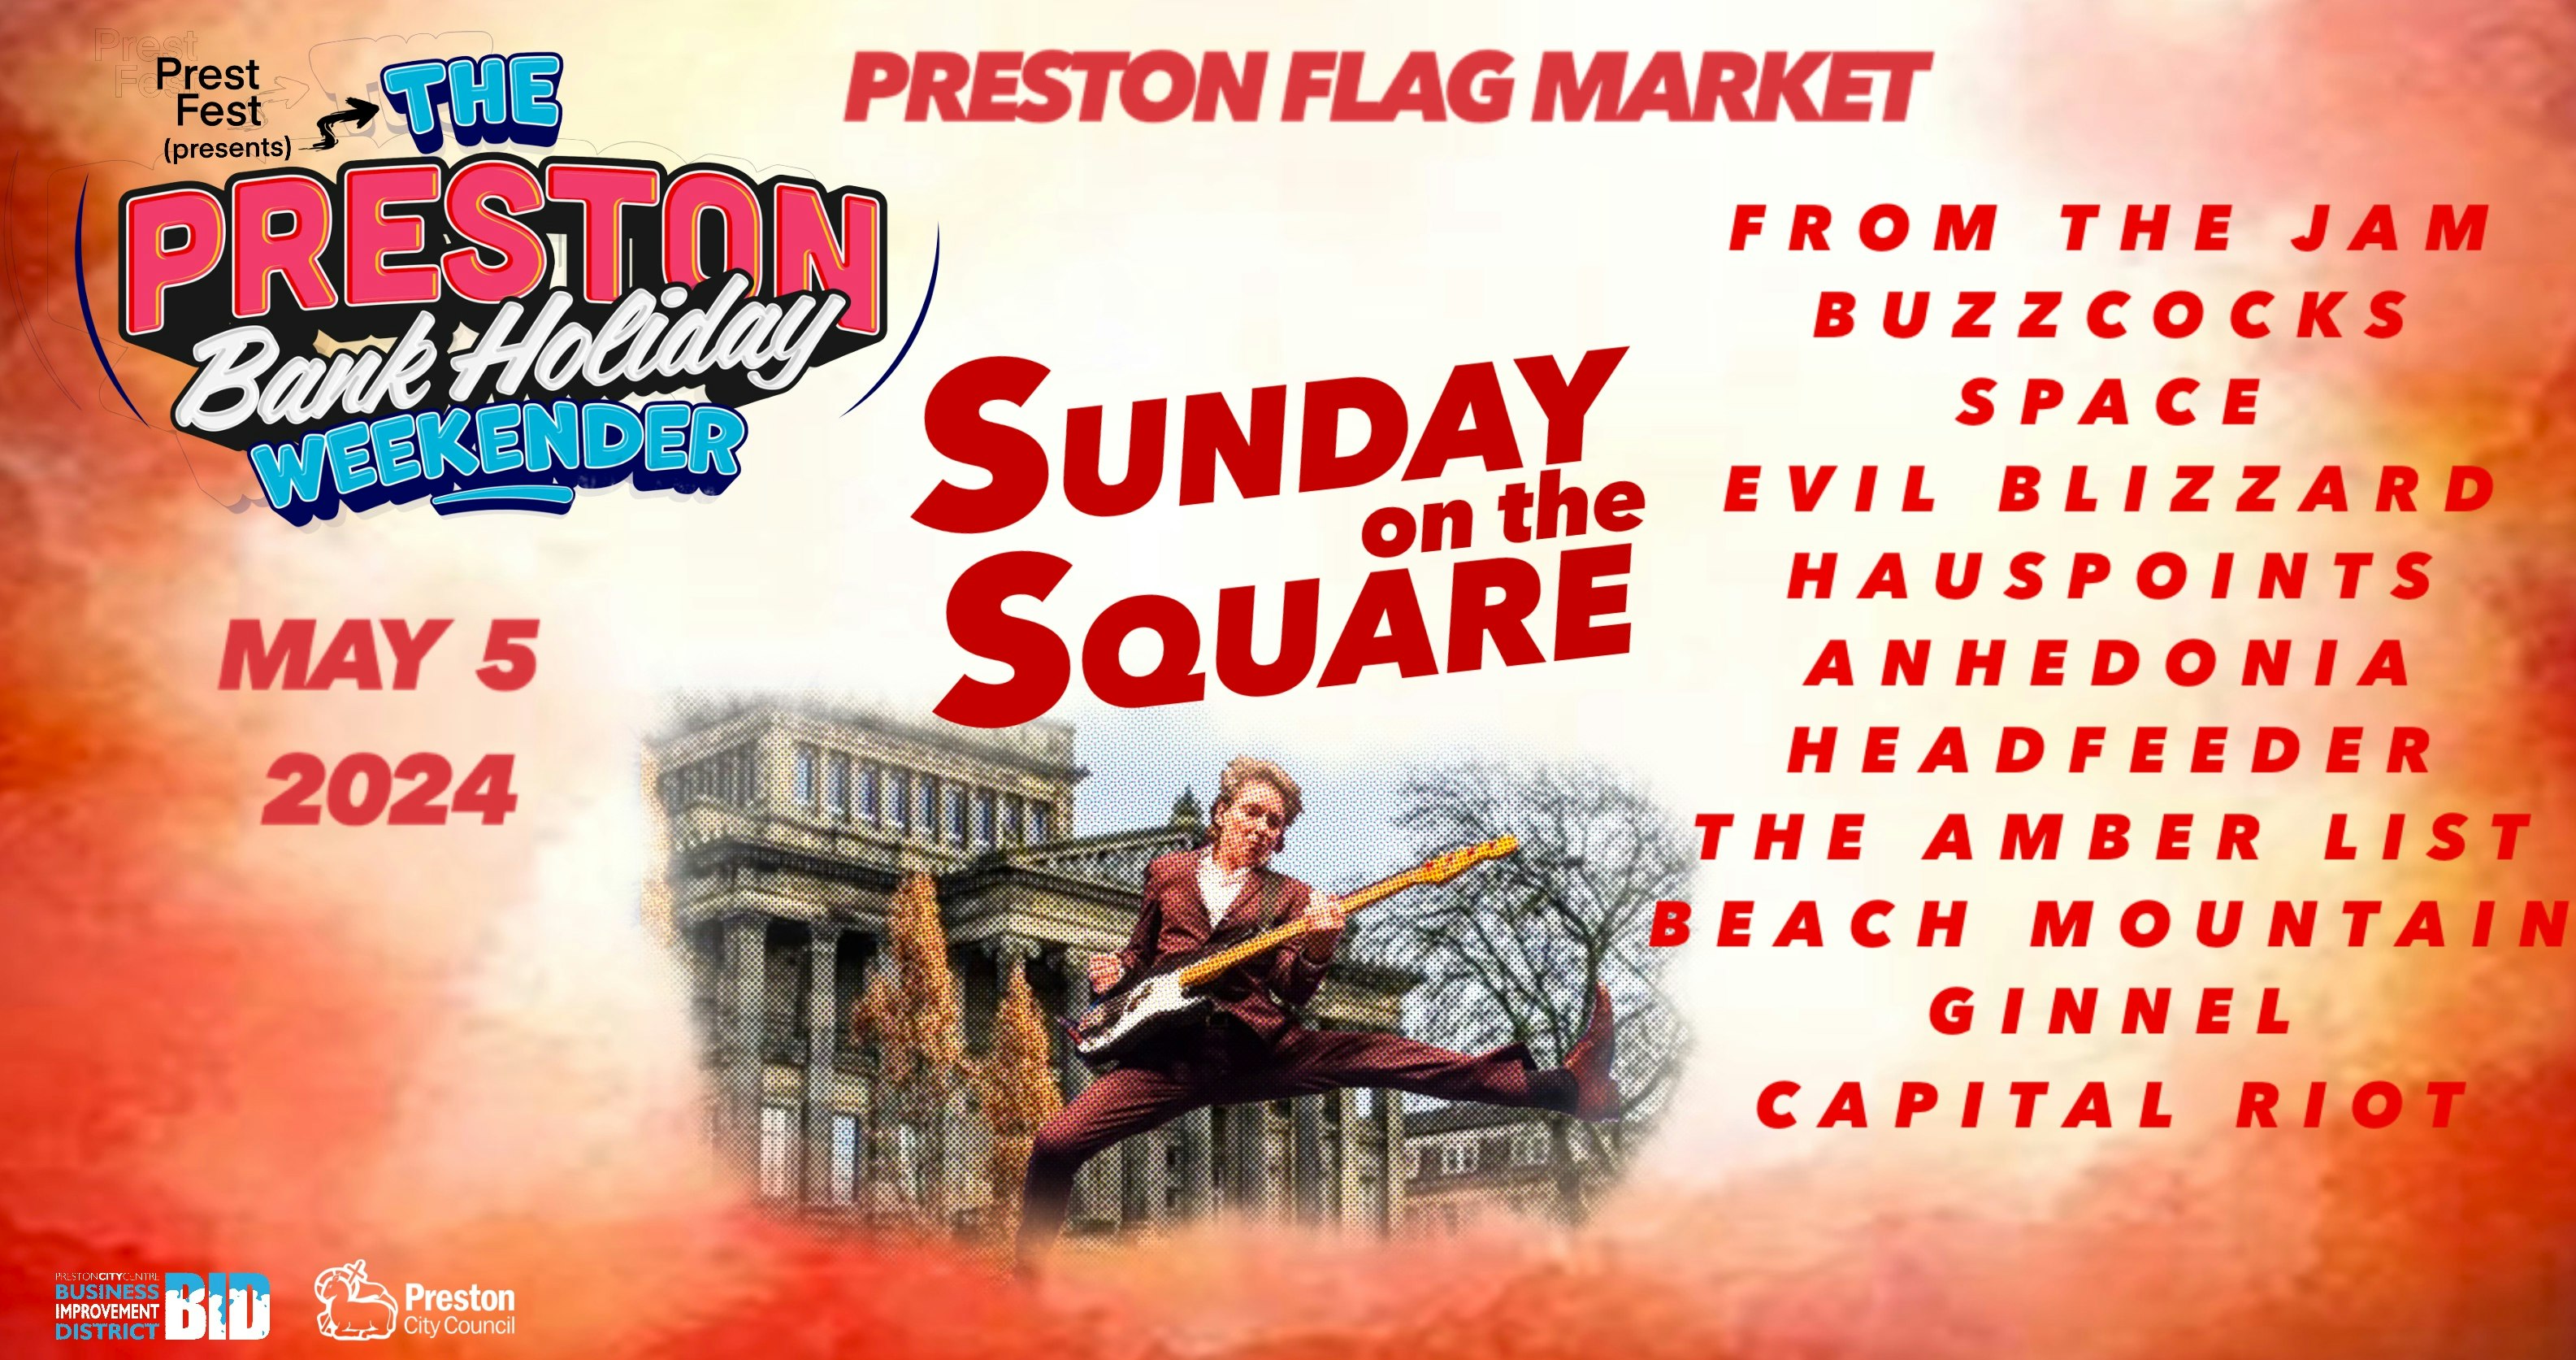 SUNDAY ON THE SQUARE